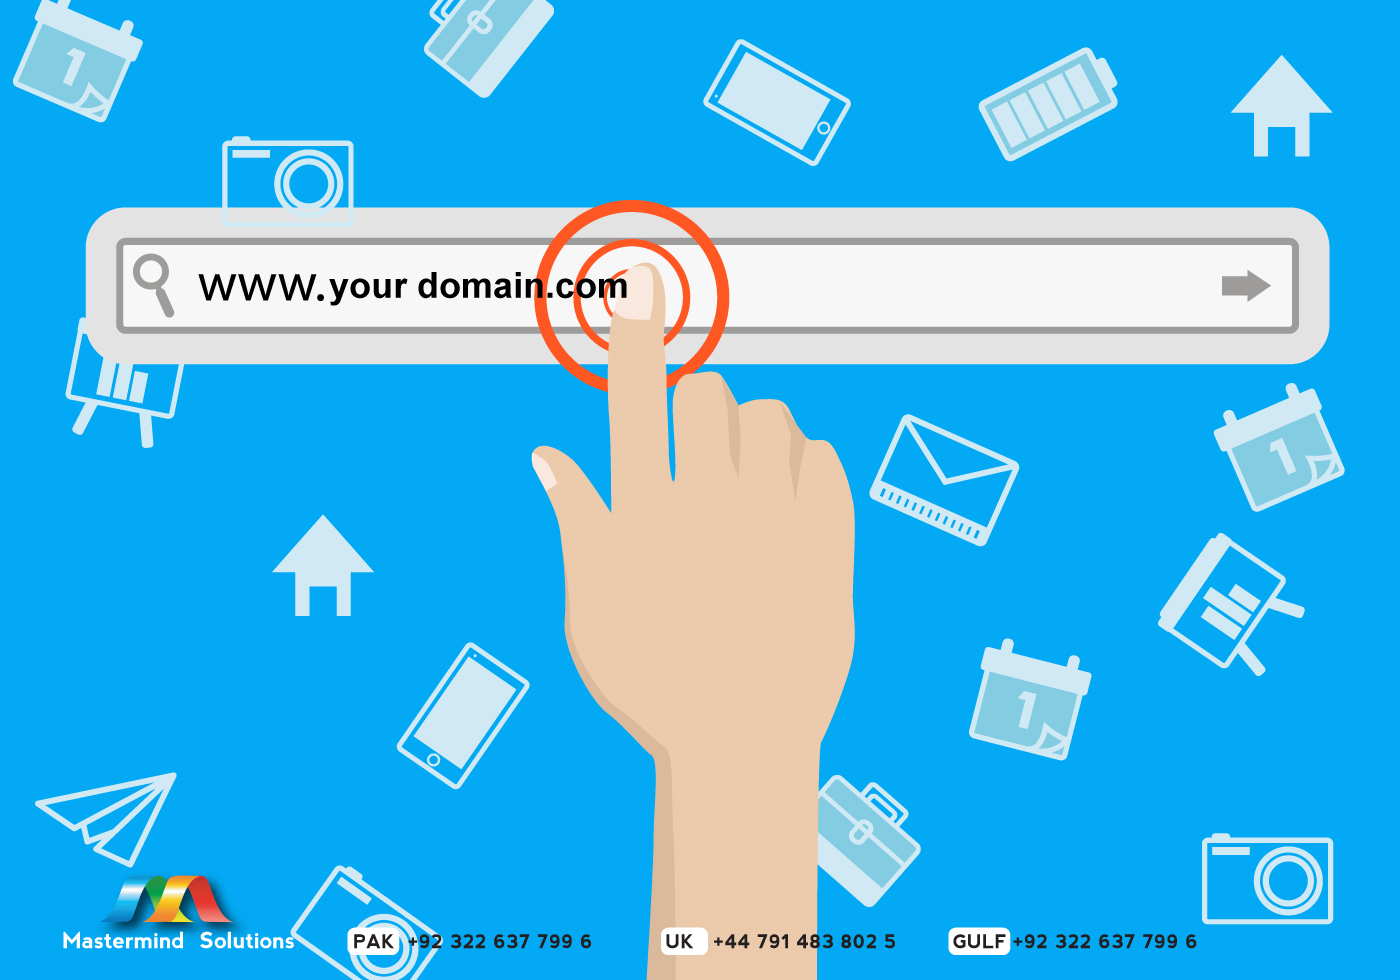 Follow the steps below to help you pick the perfect domain name.